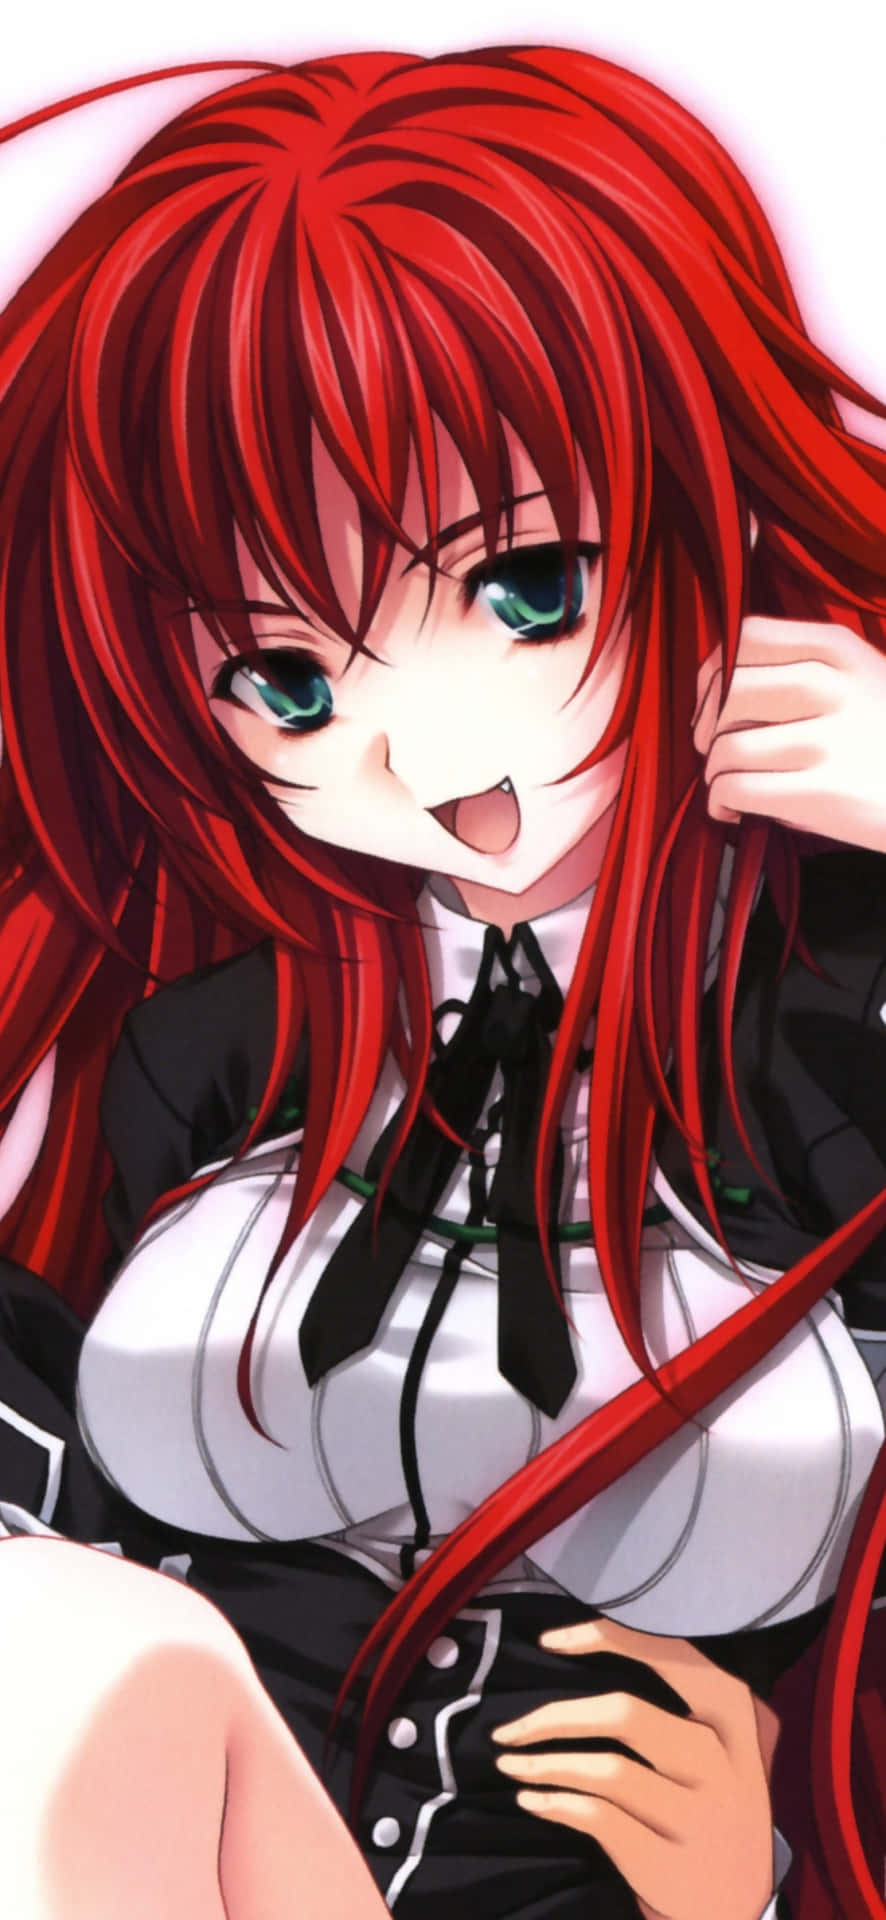 Alluring Rias Gremory in an enchanting pose Wallpaper